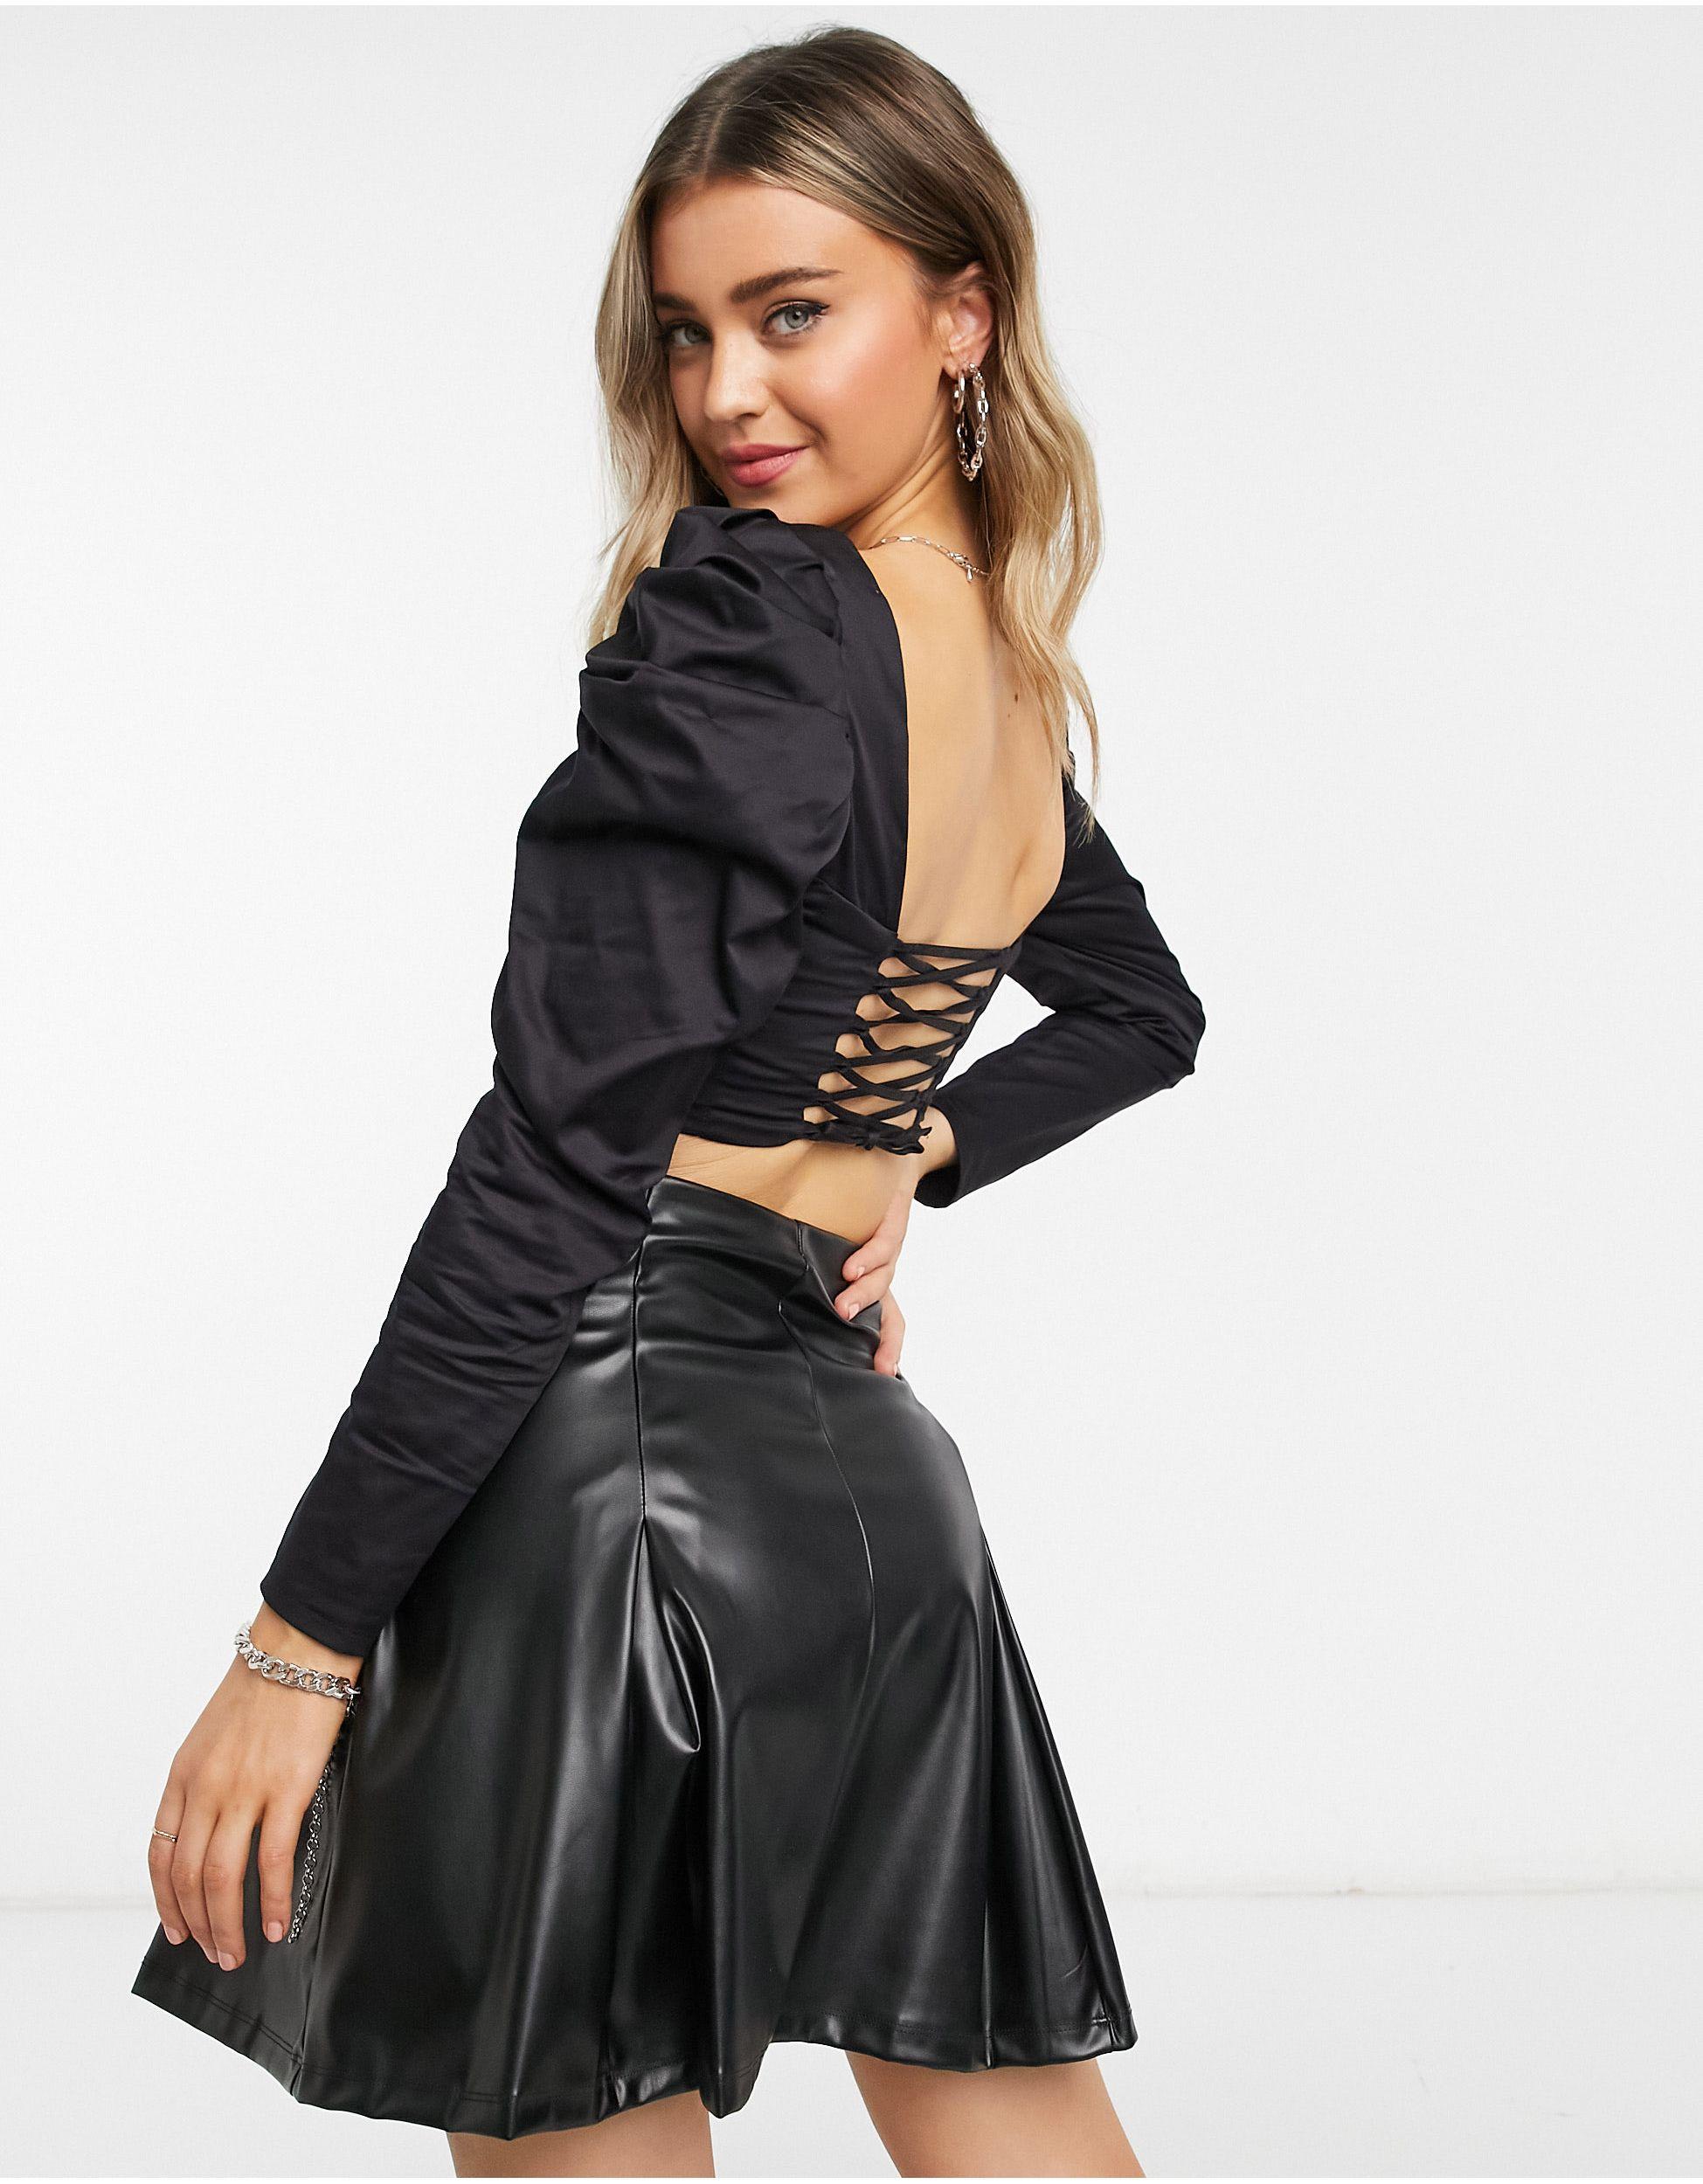 Bershka Synthetic Volume Sleeve Corset Top With Lace Up Back in Black | Lyst